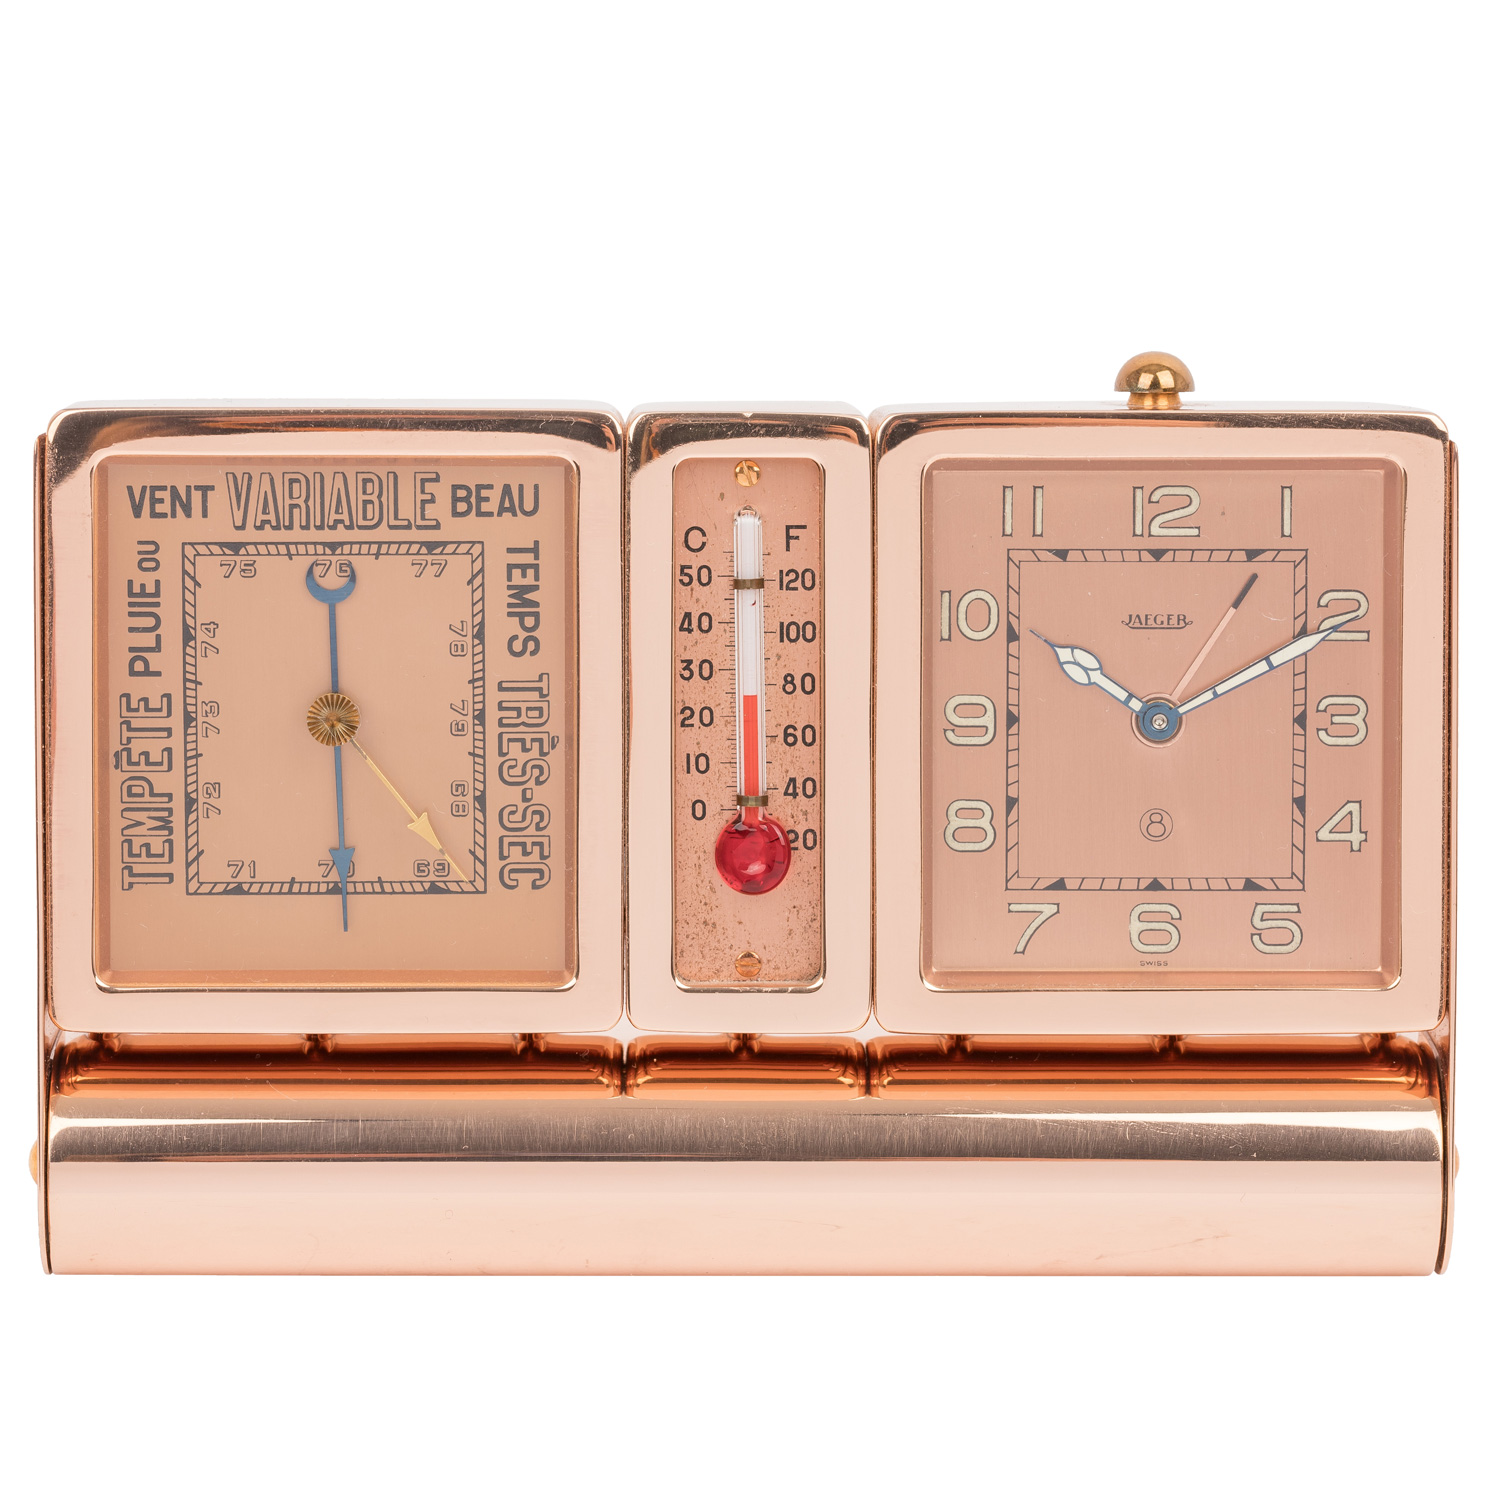 JAEGER-LECOULTRE, Reiseuhr mit Thermometer und Barometer, - Image 2 of 8